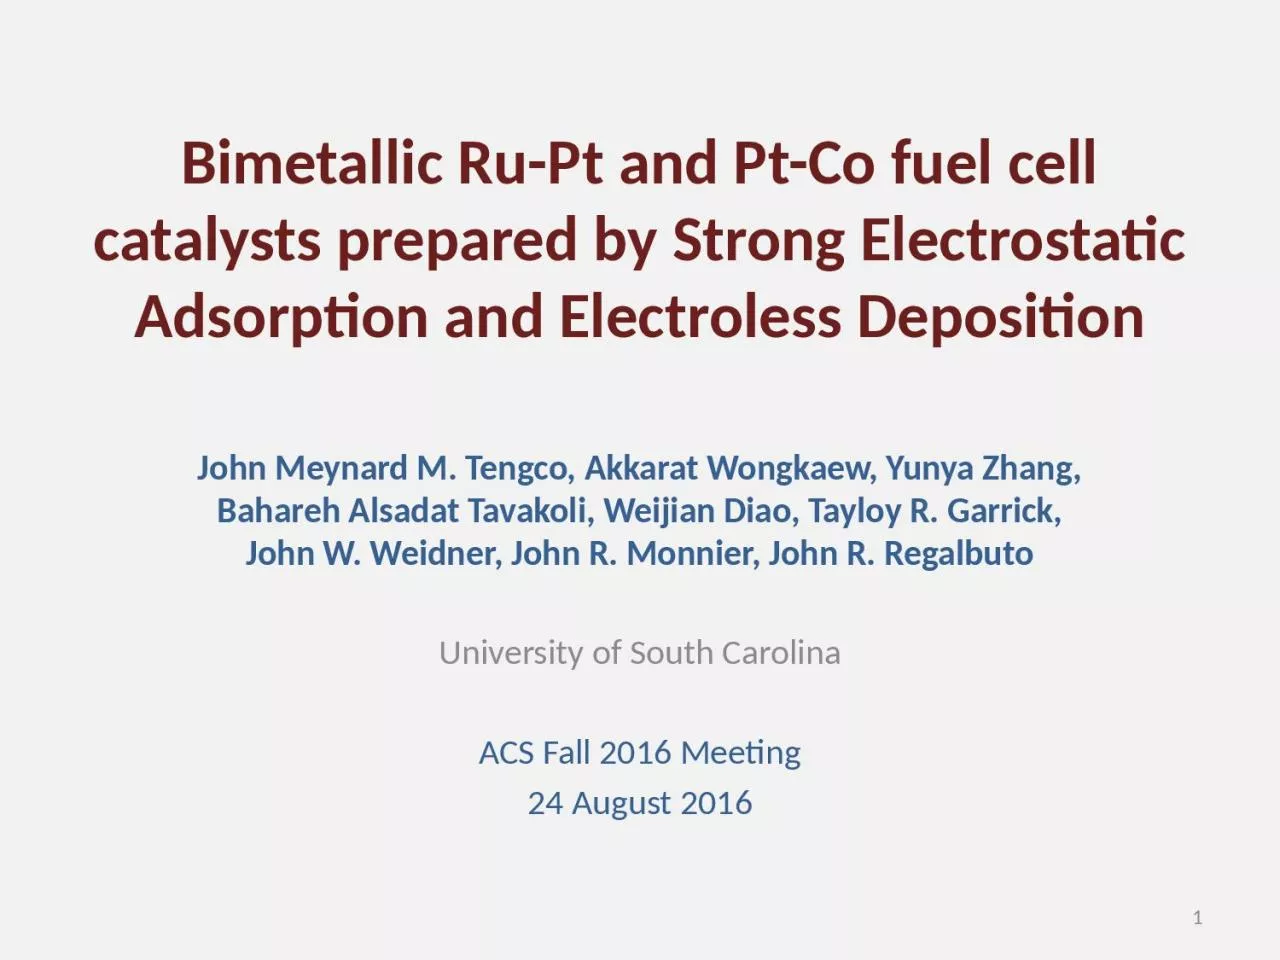 Bimetallic Ru-Pt and Pt-Co fuel cell catalysts prepared by Strong Electrostatic Adsorption